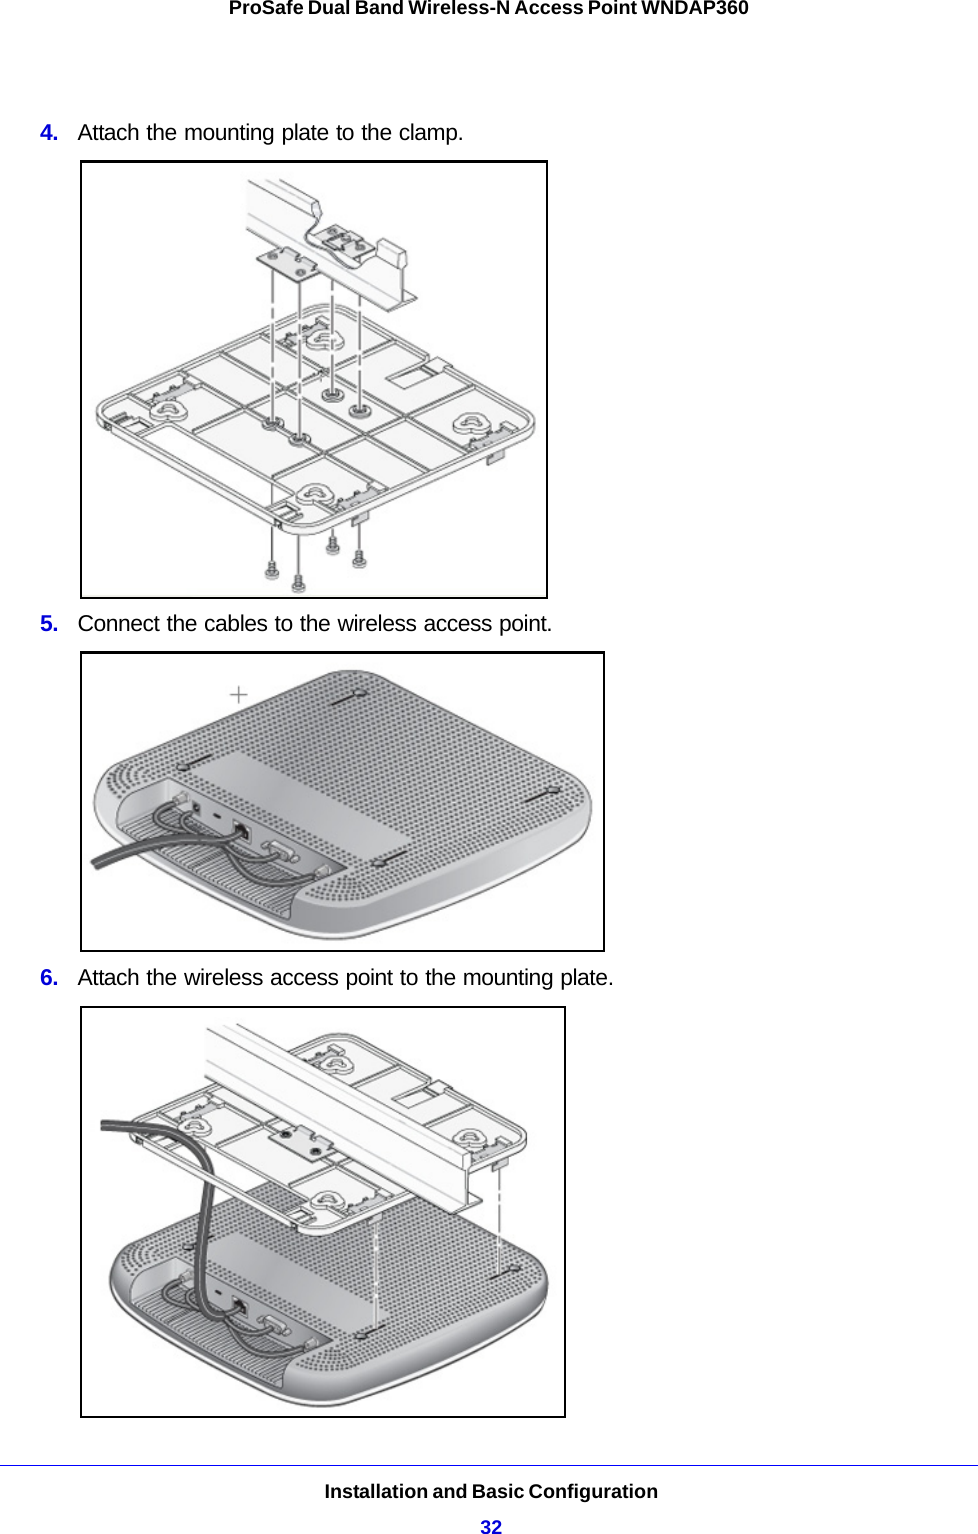 Installation and Basic Configuration32ProSafe Dual Band Wireless-N Access Point WNDAP360 4.  Attach the mounting plate to the clamp.5.  Connect the cables to the wireless access point.6.  Attach the wireless access point to the mounting plate.